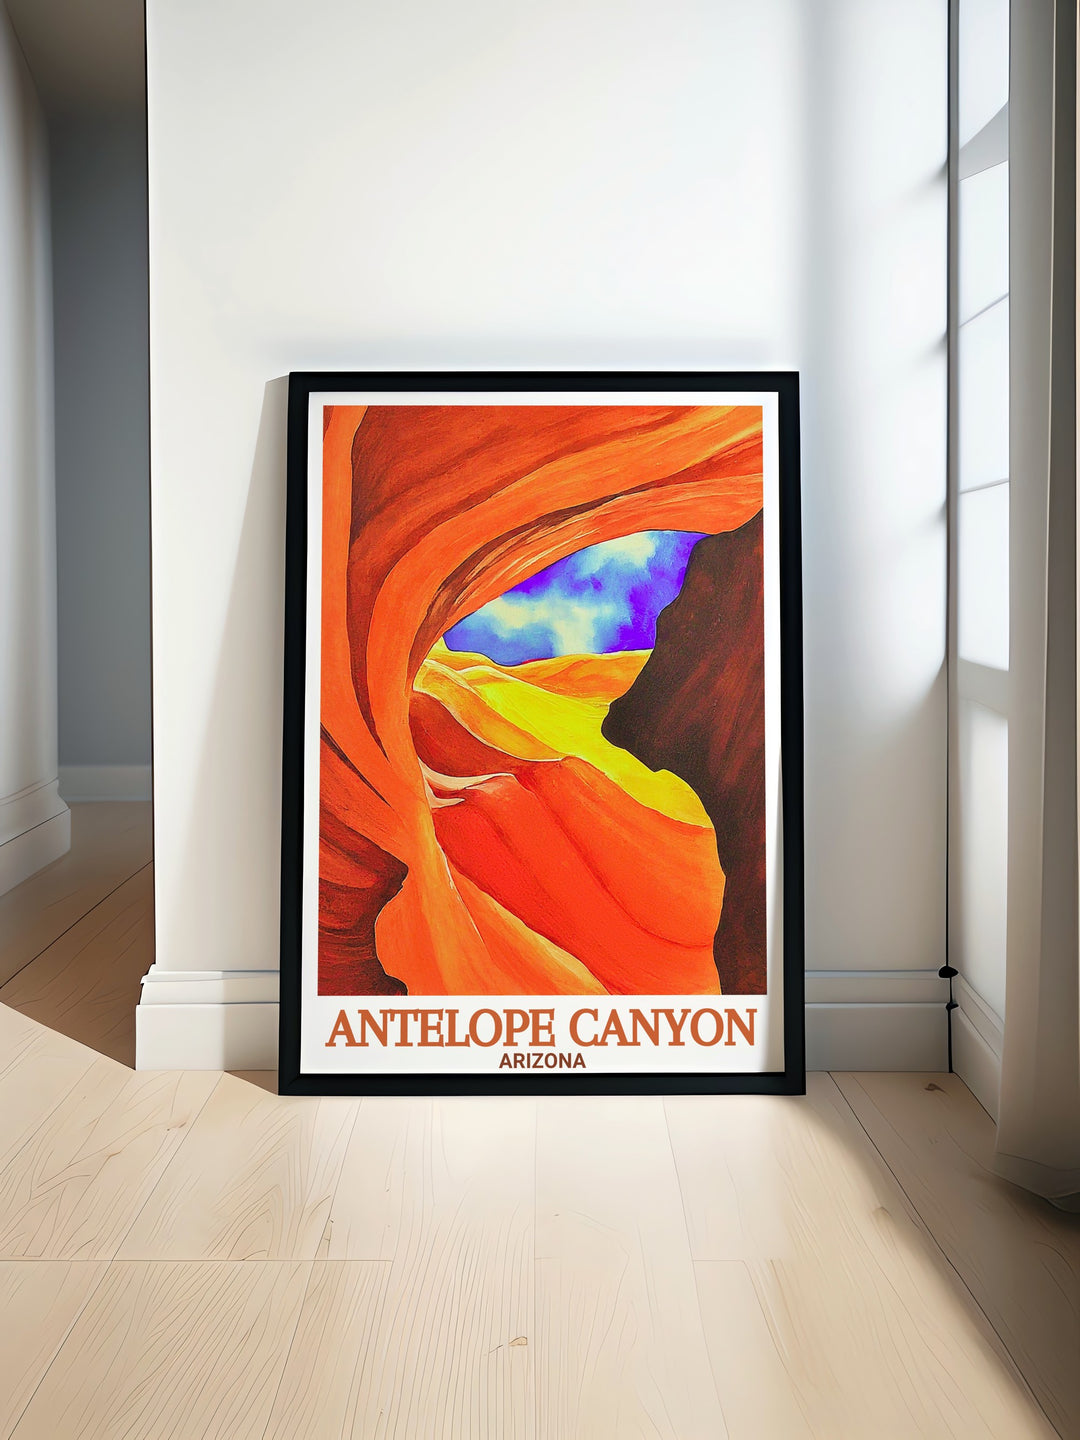 Antelope Canyon art print showcasing the vibrant colors and intricate rock formations of this stunning Arizona landmark perfect for adding a touch of natural beauty to any space or as an Arizona travel gift for art and nature enthusiasts.